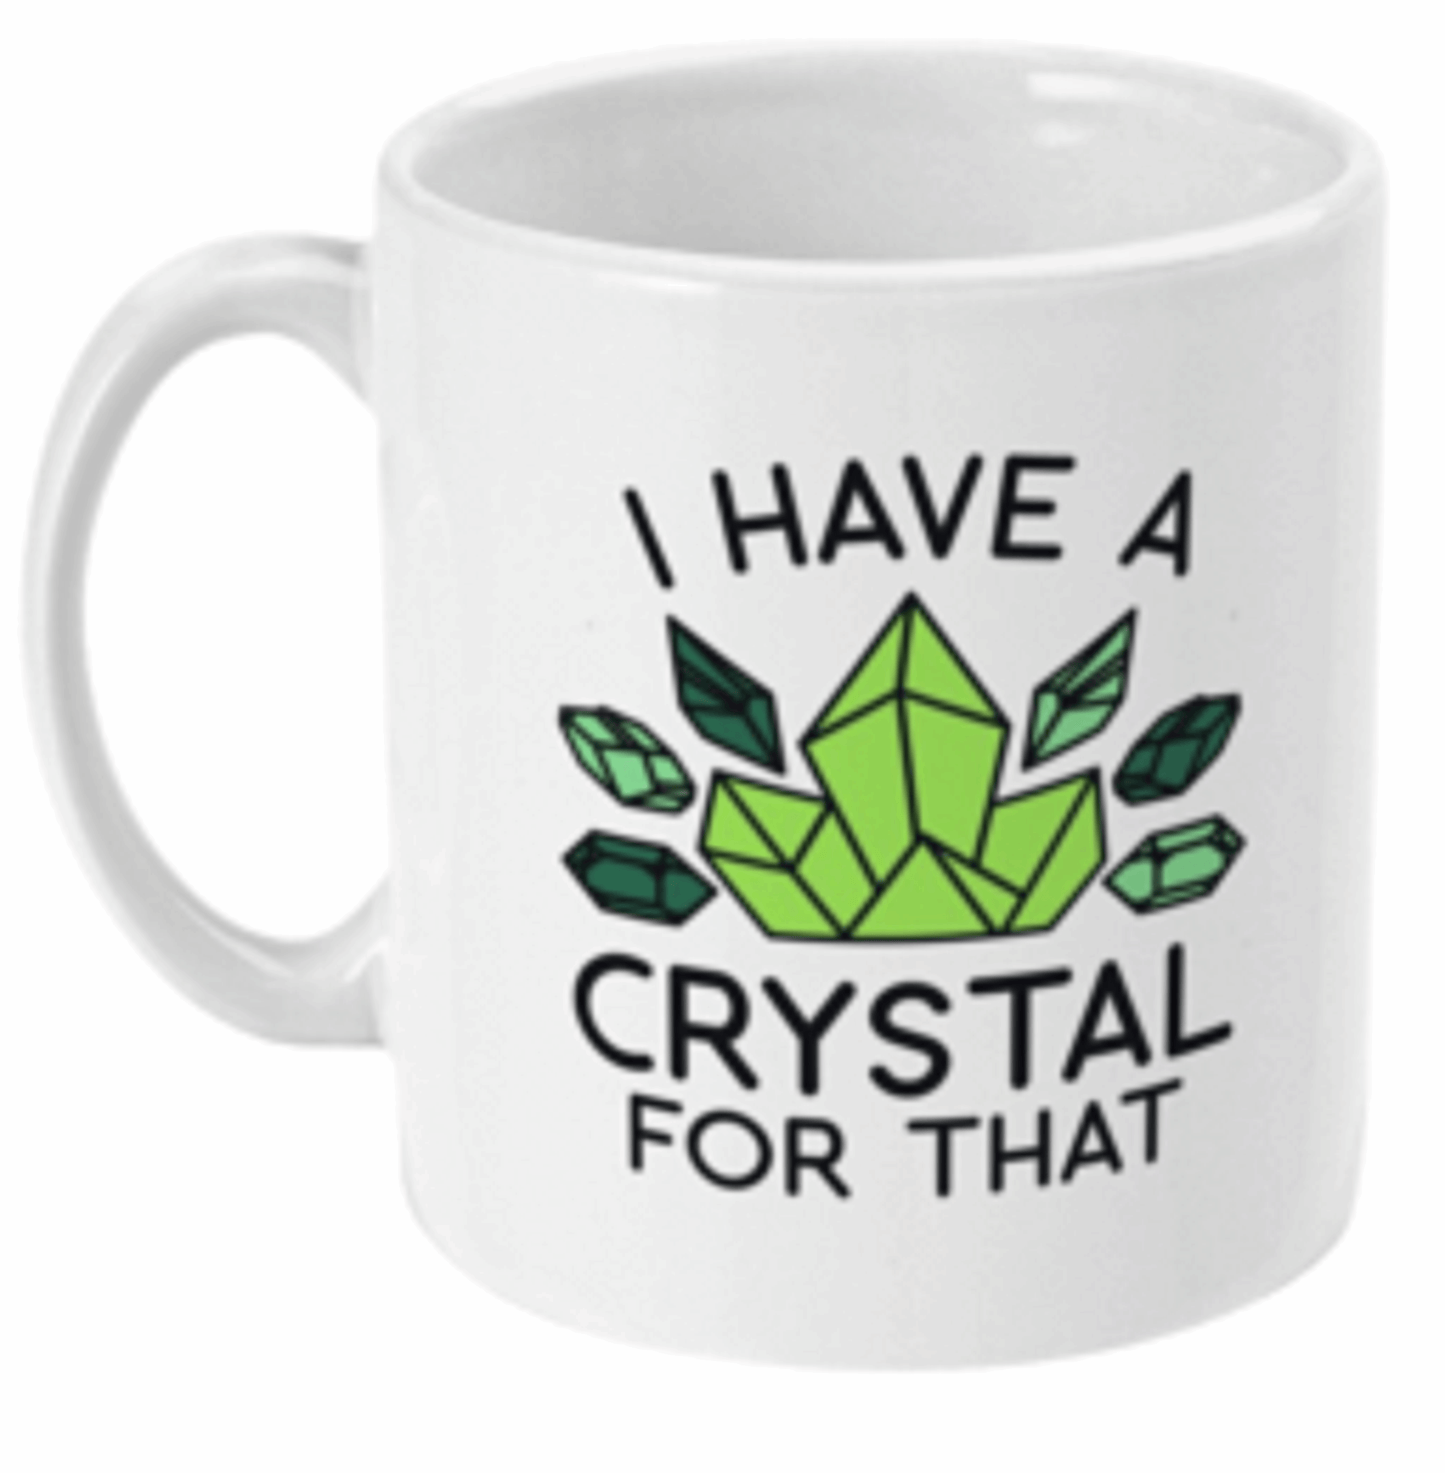  I Have A Crystal For That Coffee Mug by Free Spirit Accessories sold by Free Spirit Accessories